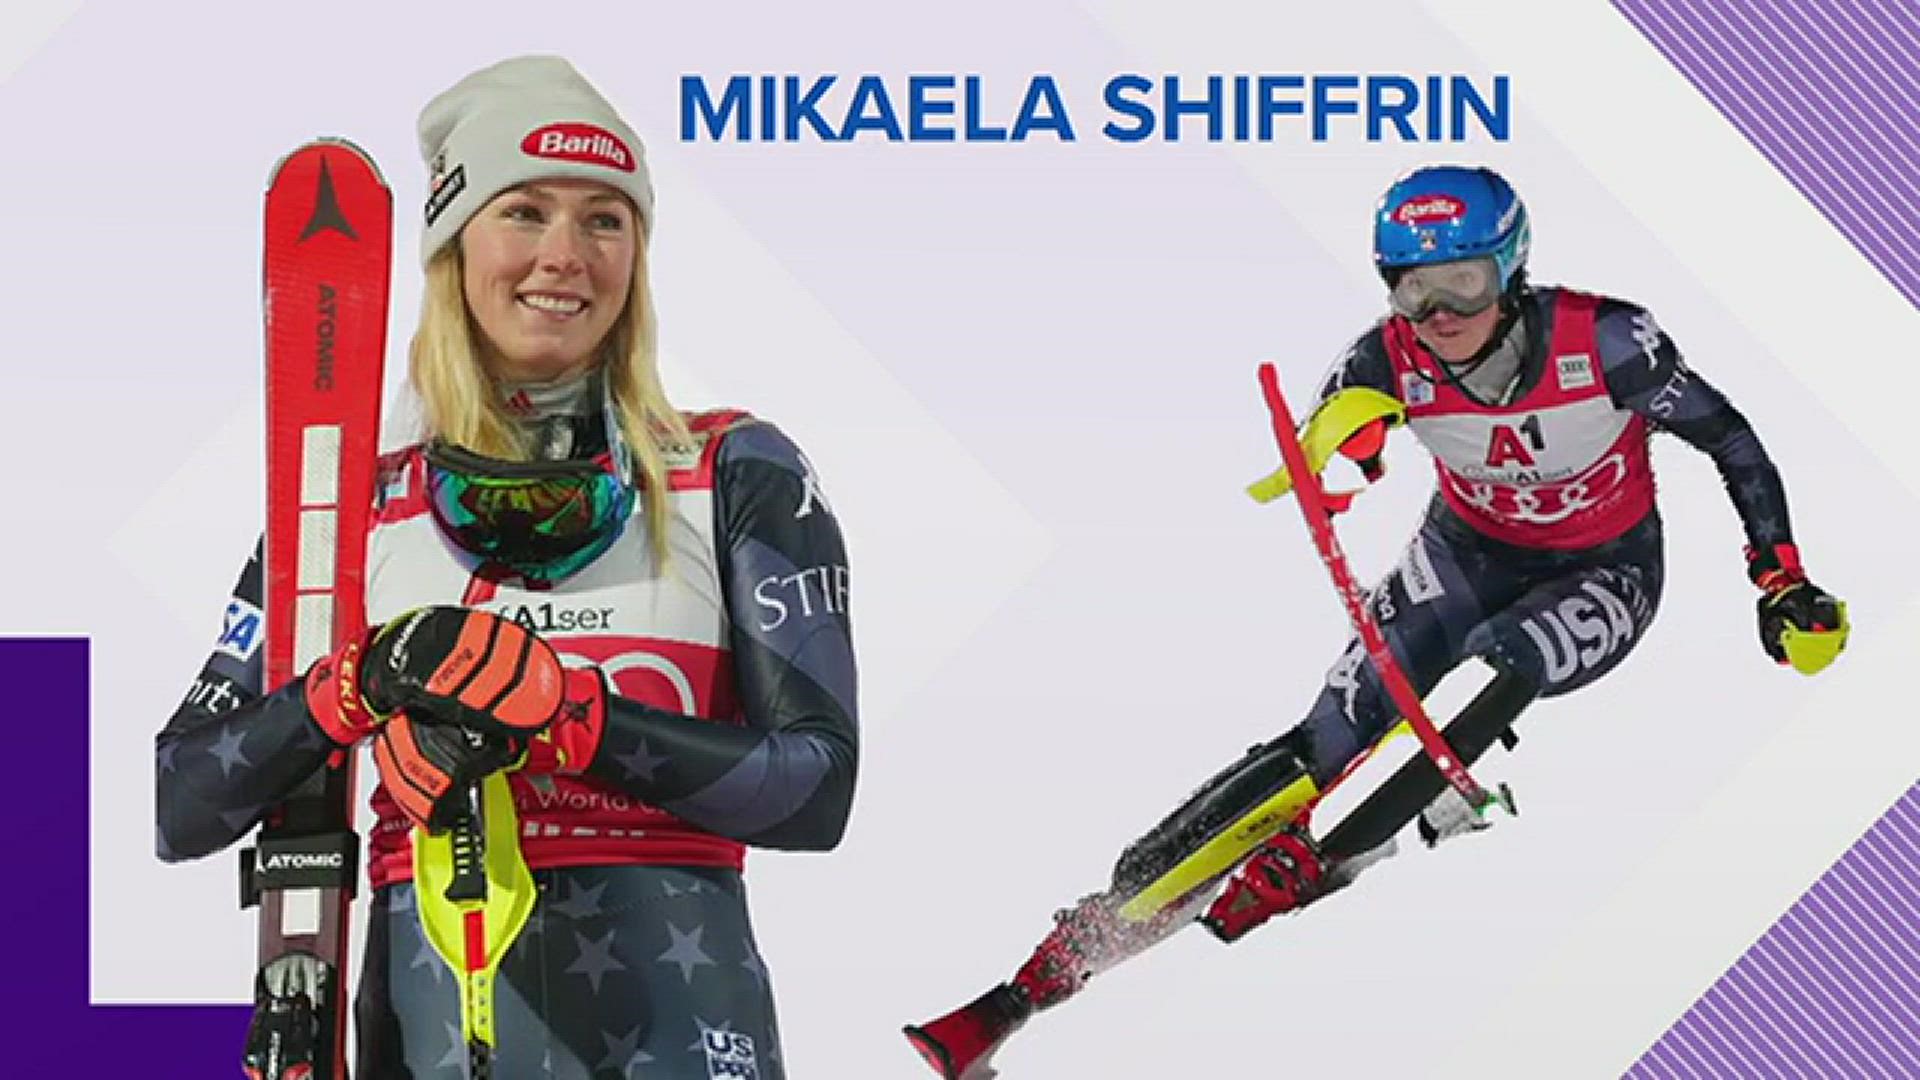 Mikaela Shiffrin was sick between runs and vomited after the second run, finishing second in Tuesday's slalom race.